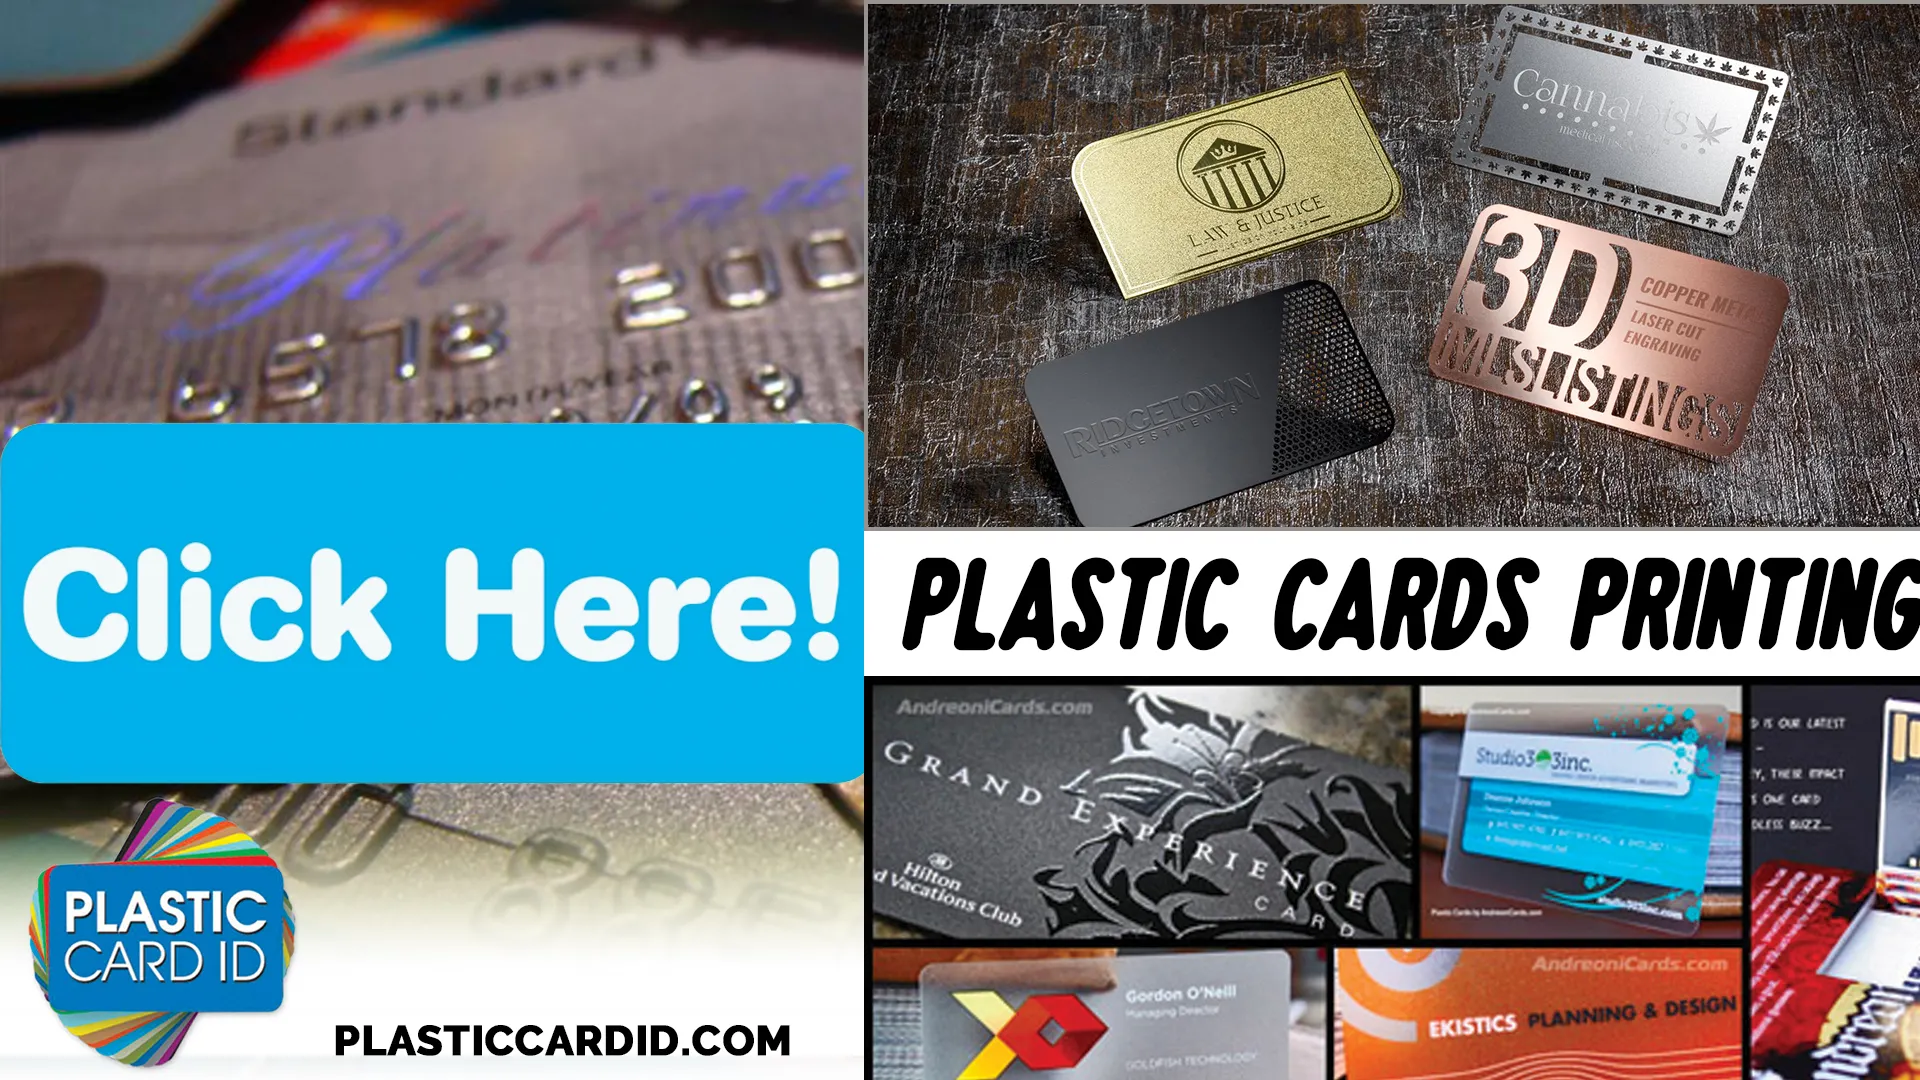 Welcome to the Sustainable Future of Card Manufacturing